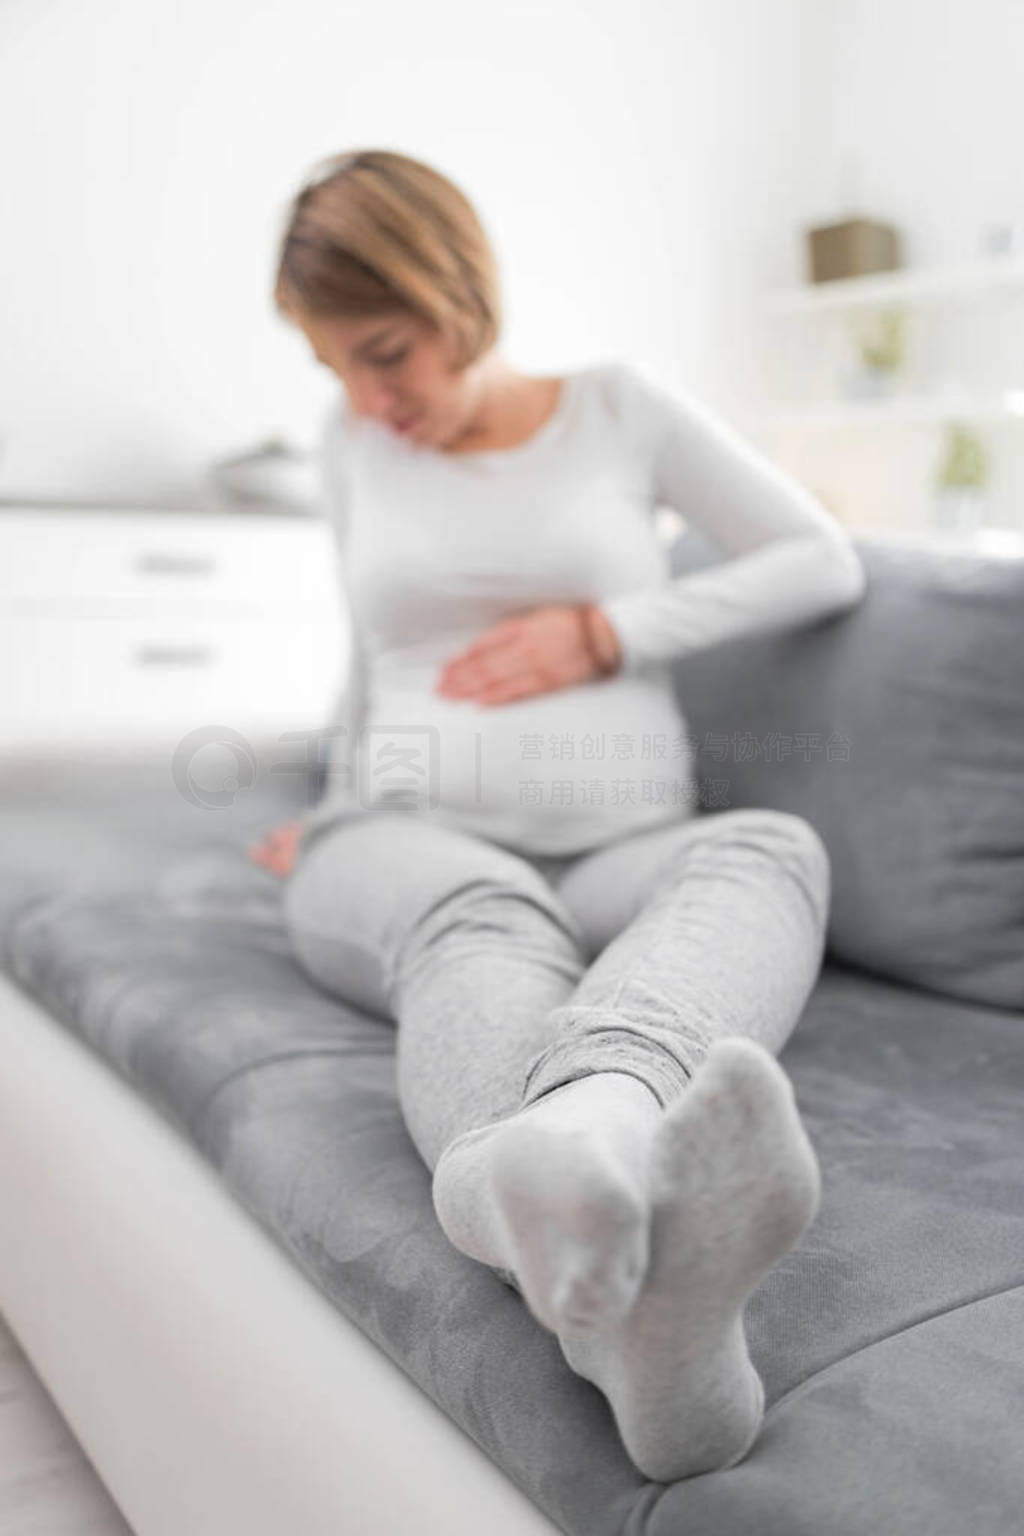 Pregnant tired exhausted woman with stomach issues at home on a